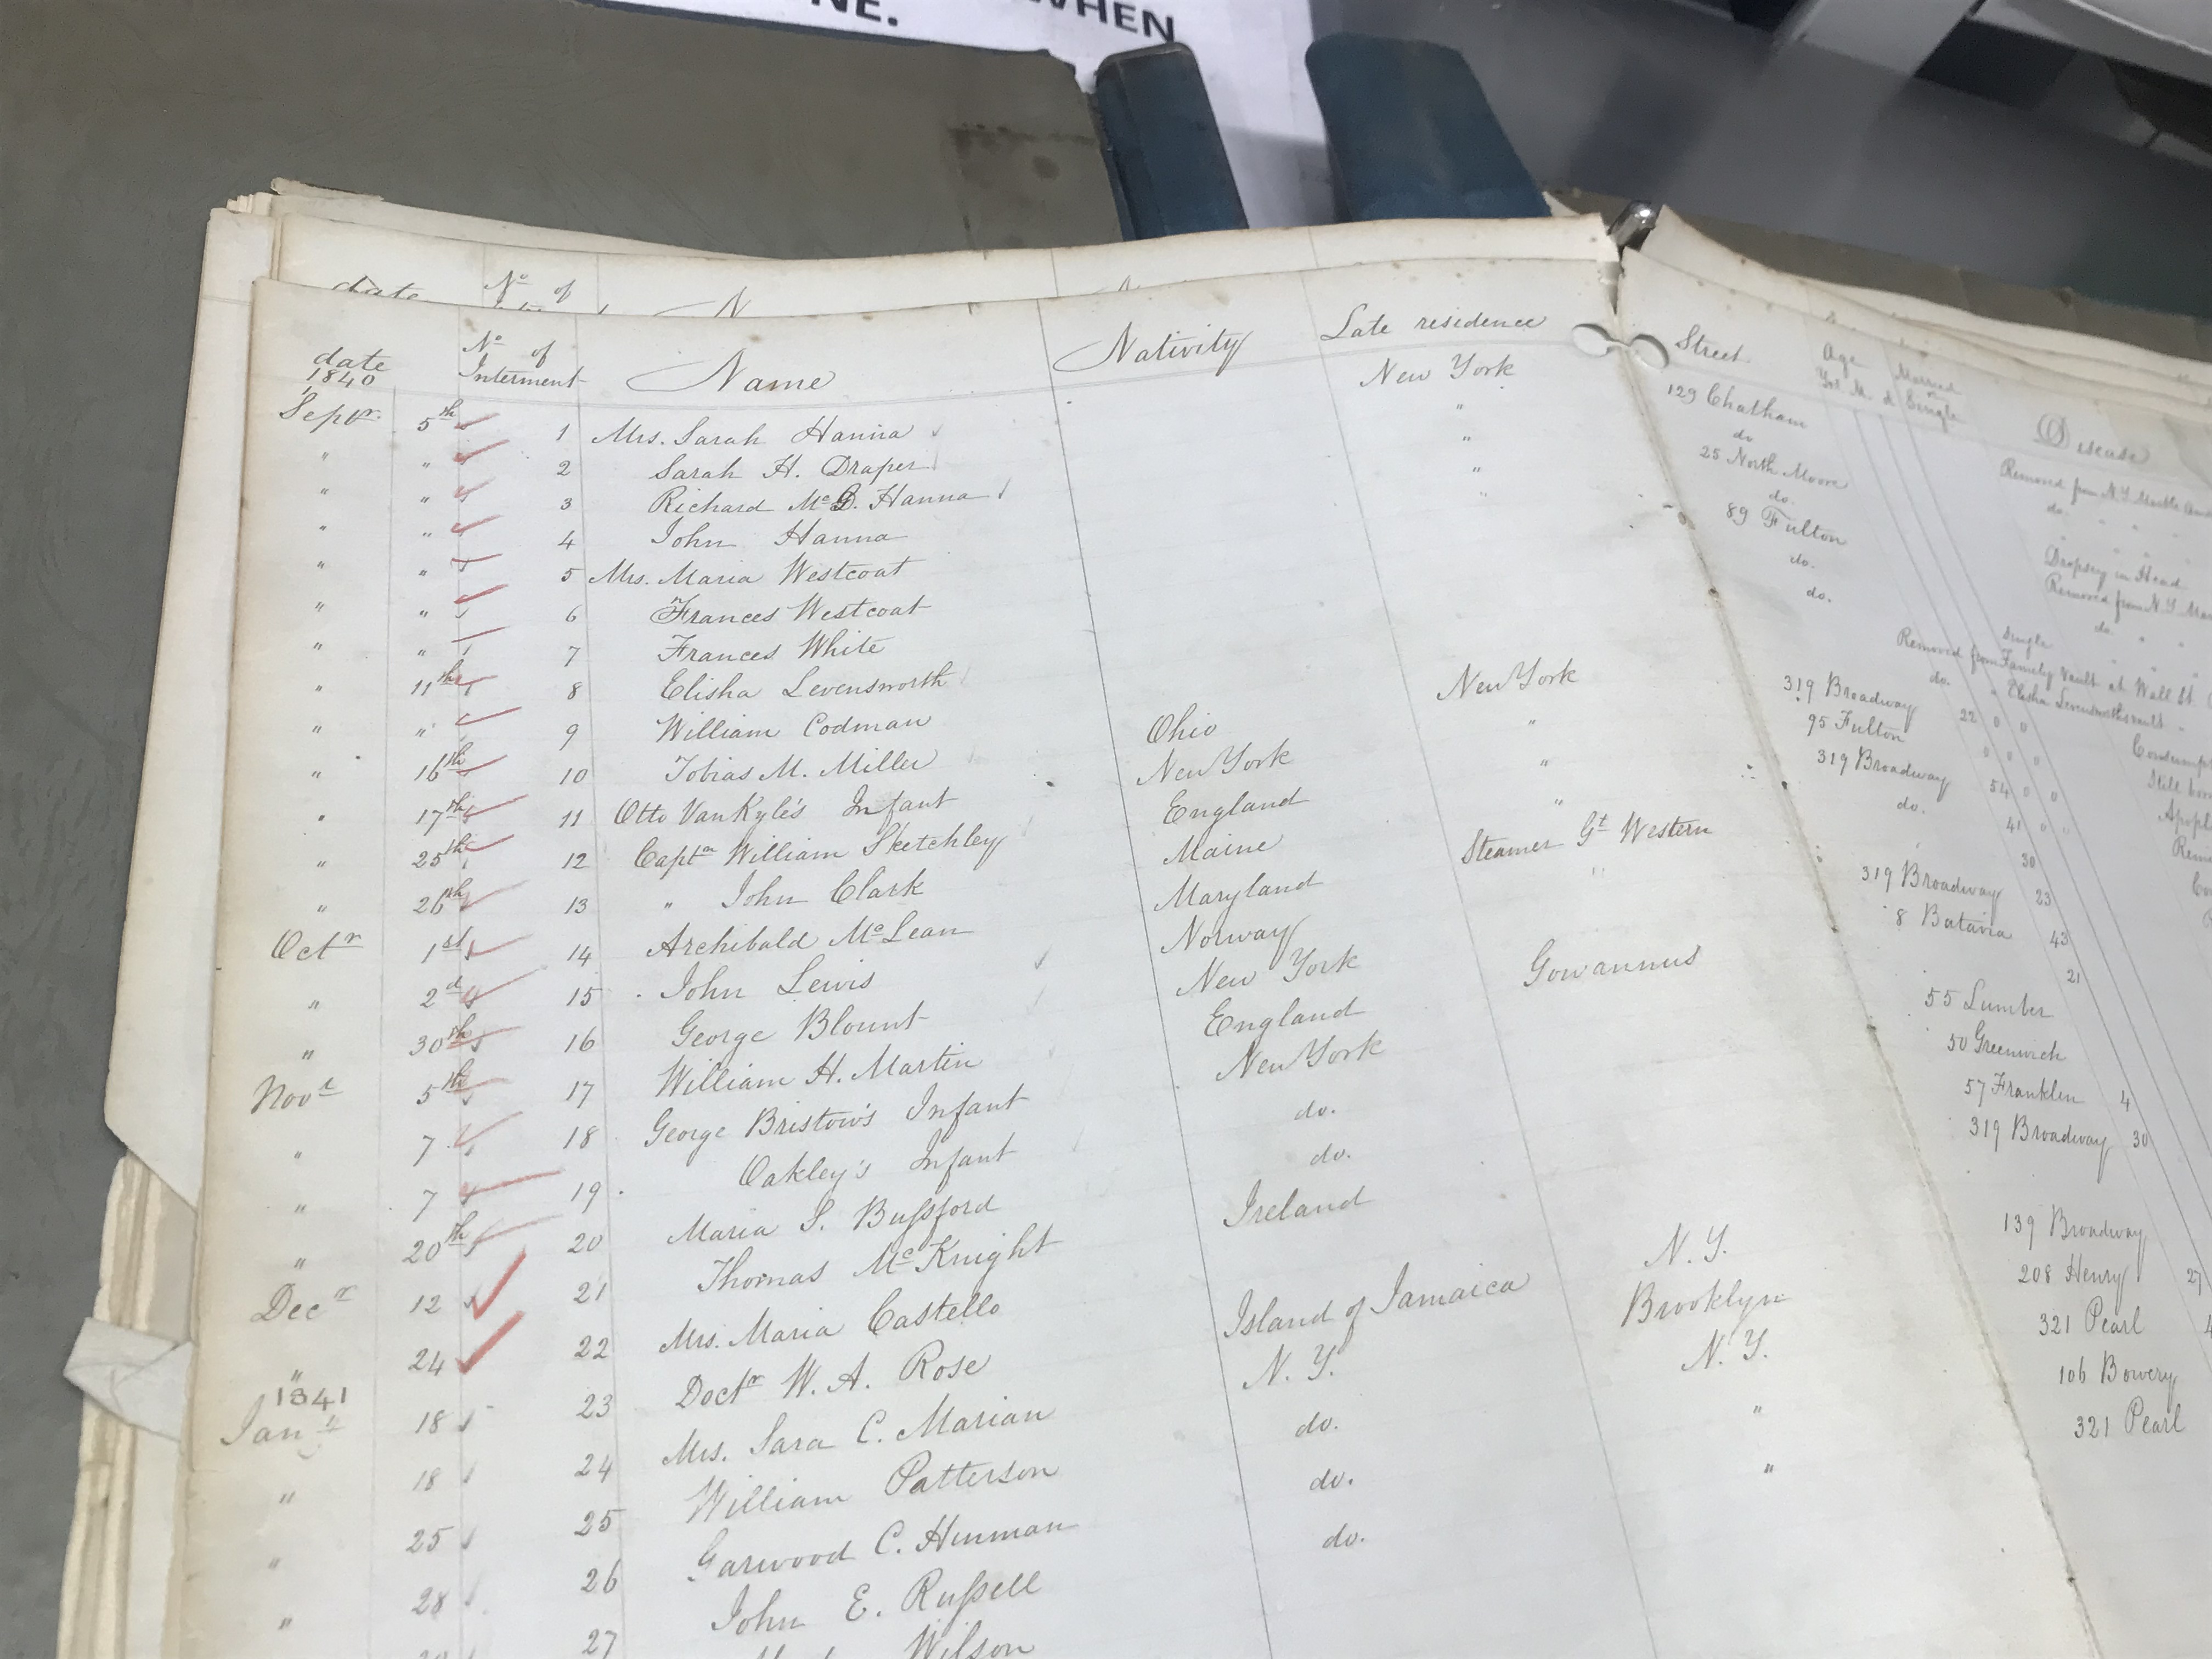 Chronology book at the Green-Wood Cemetery archives. This shows the very first burials at the site.